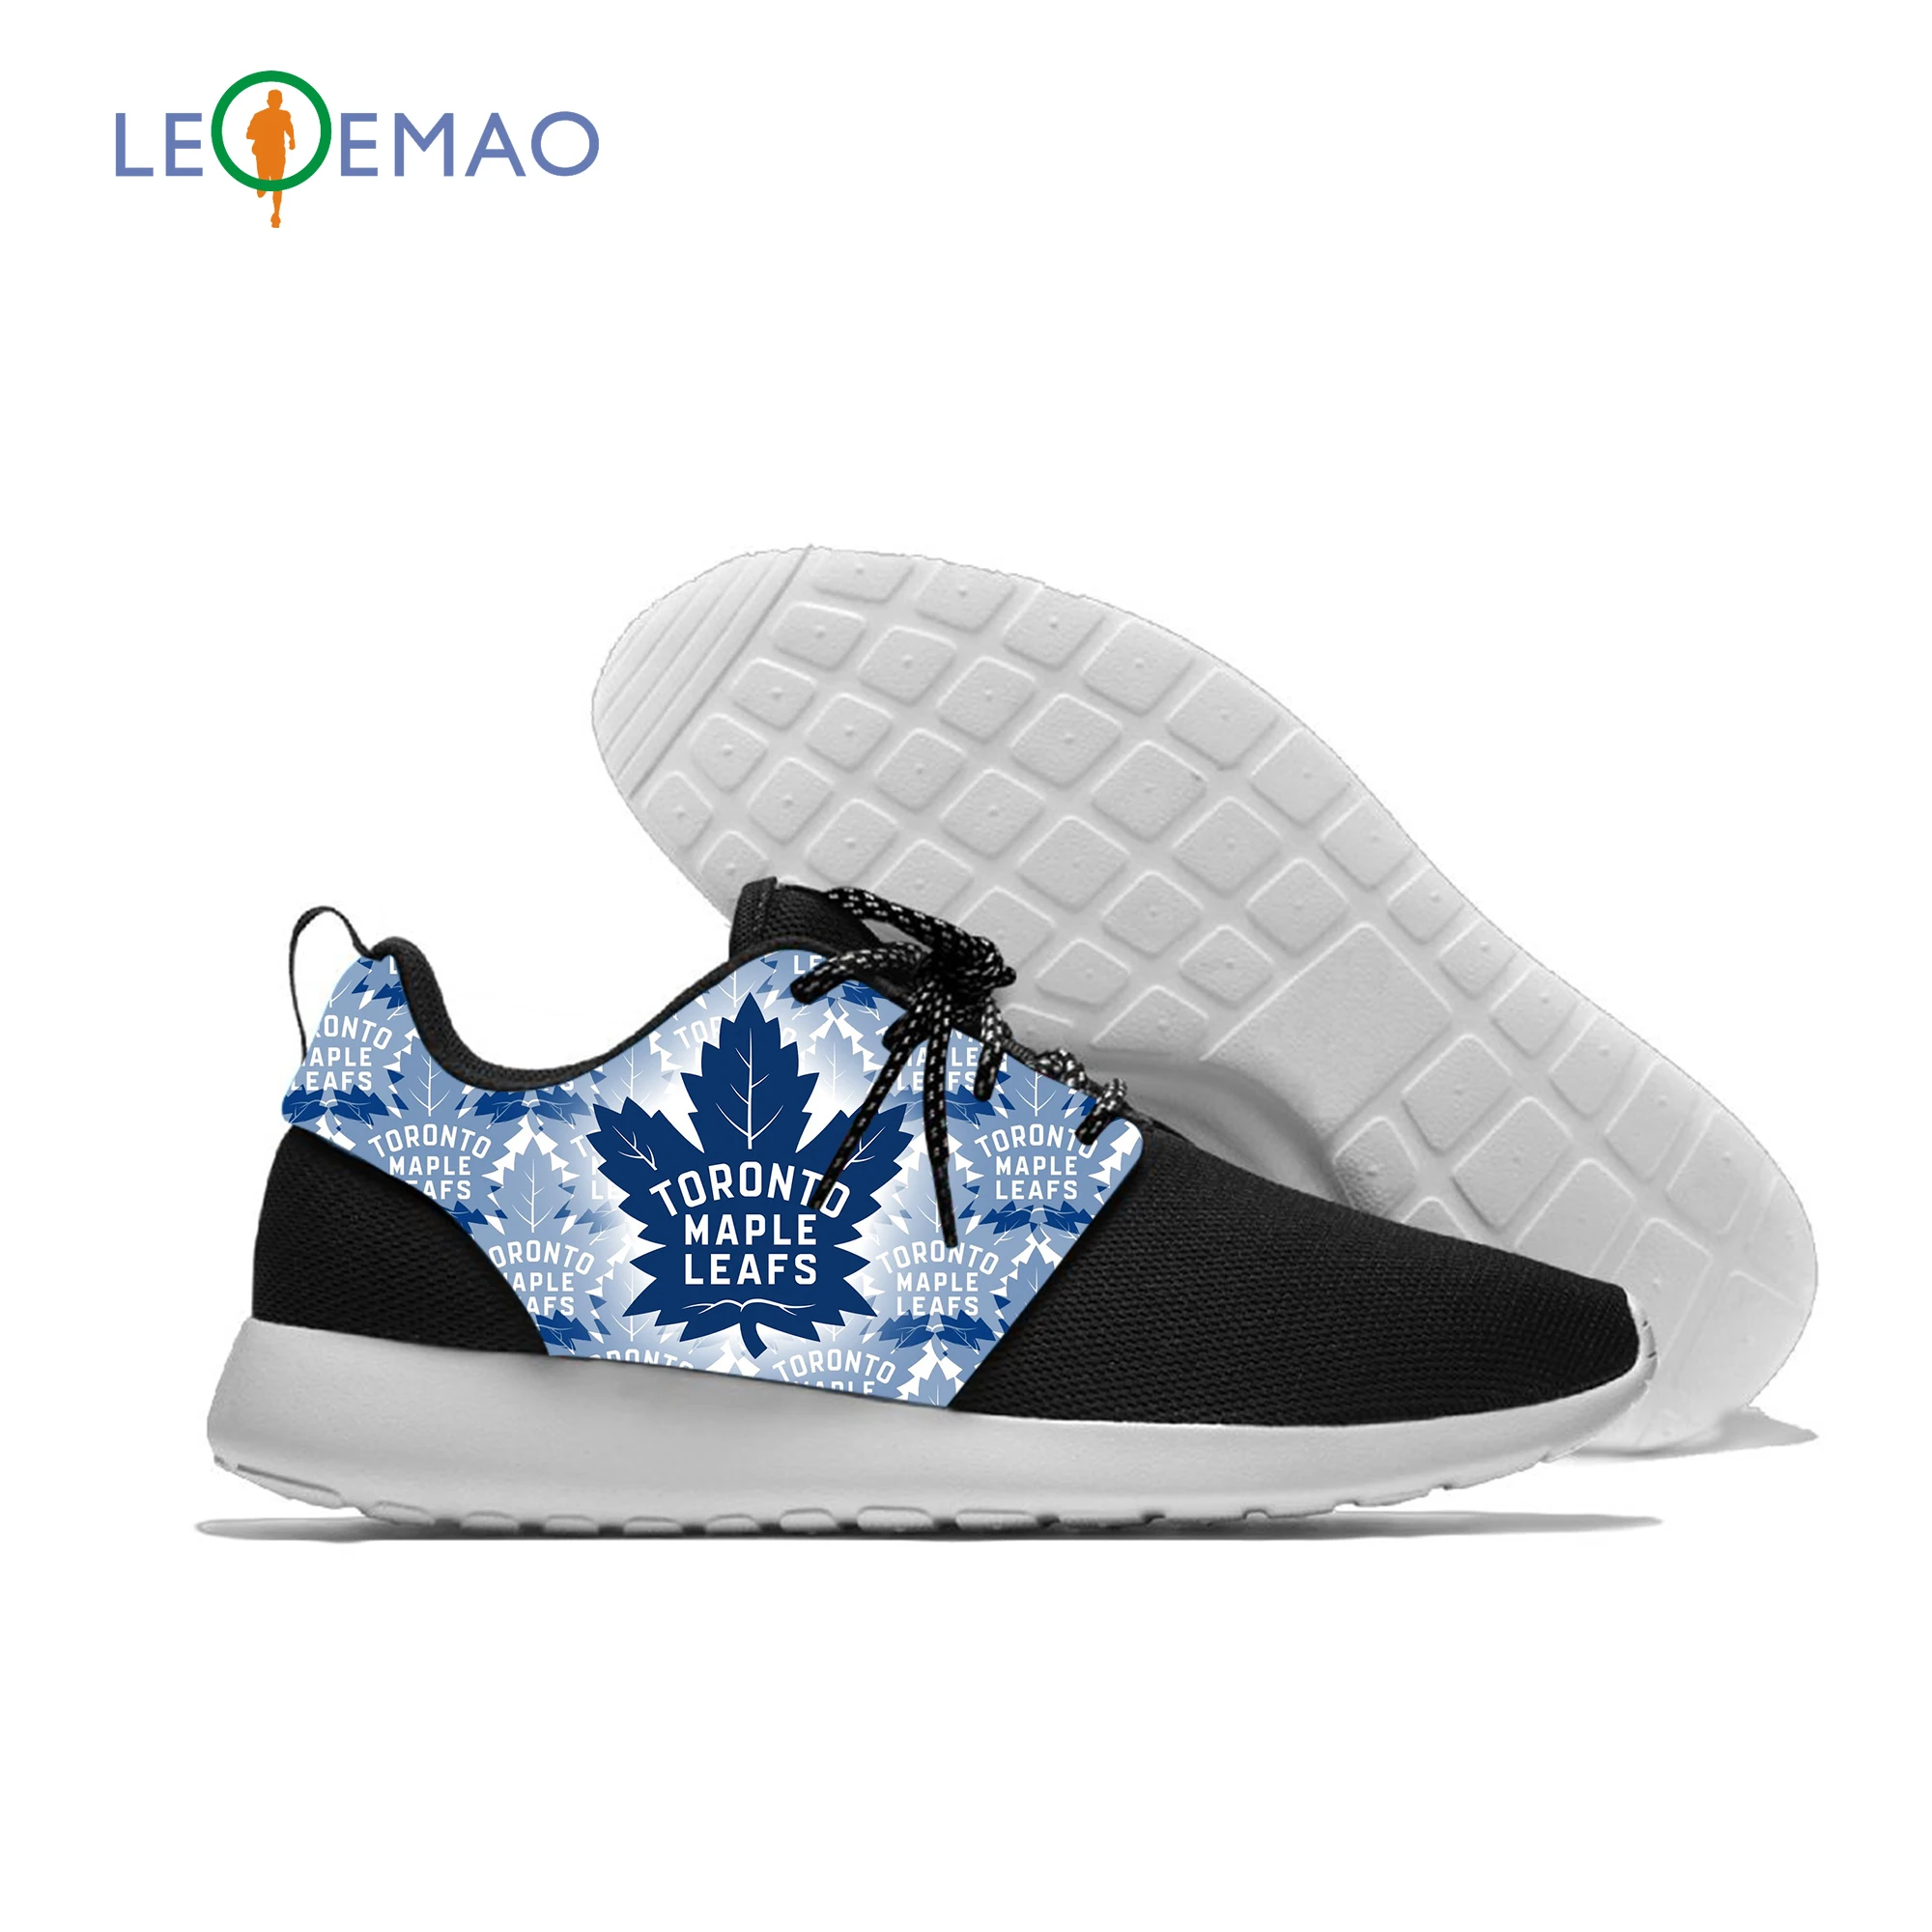 

2020 Hot Fashion Printing Maple Leafs Sneakers Unisex Lightweight Toronto Baseball Team Fans Casual Shoes